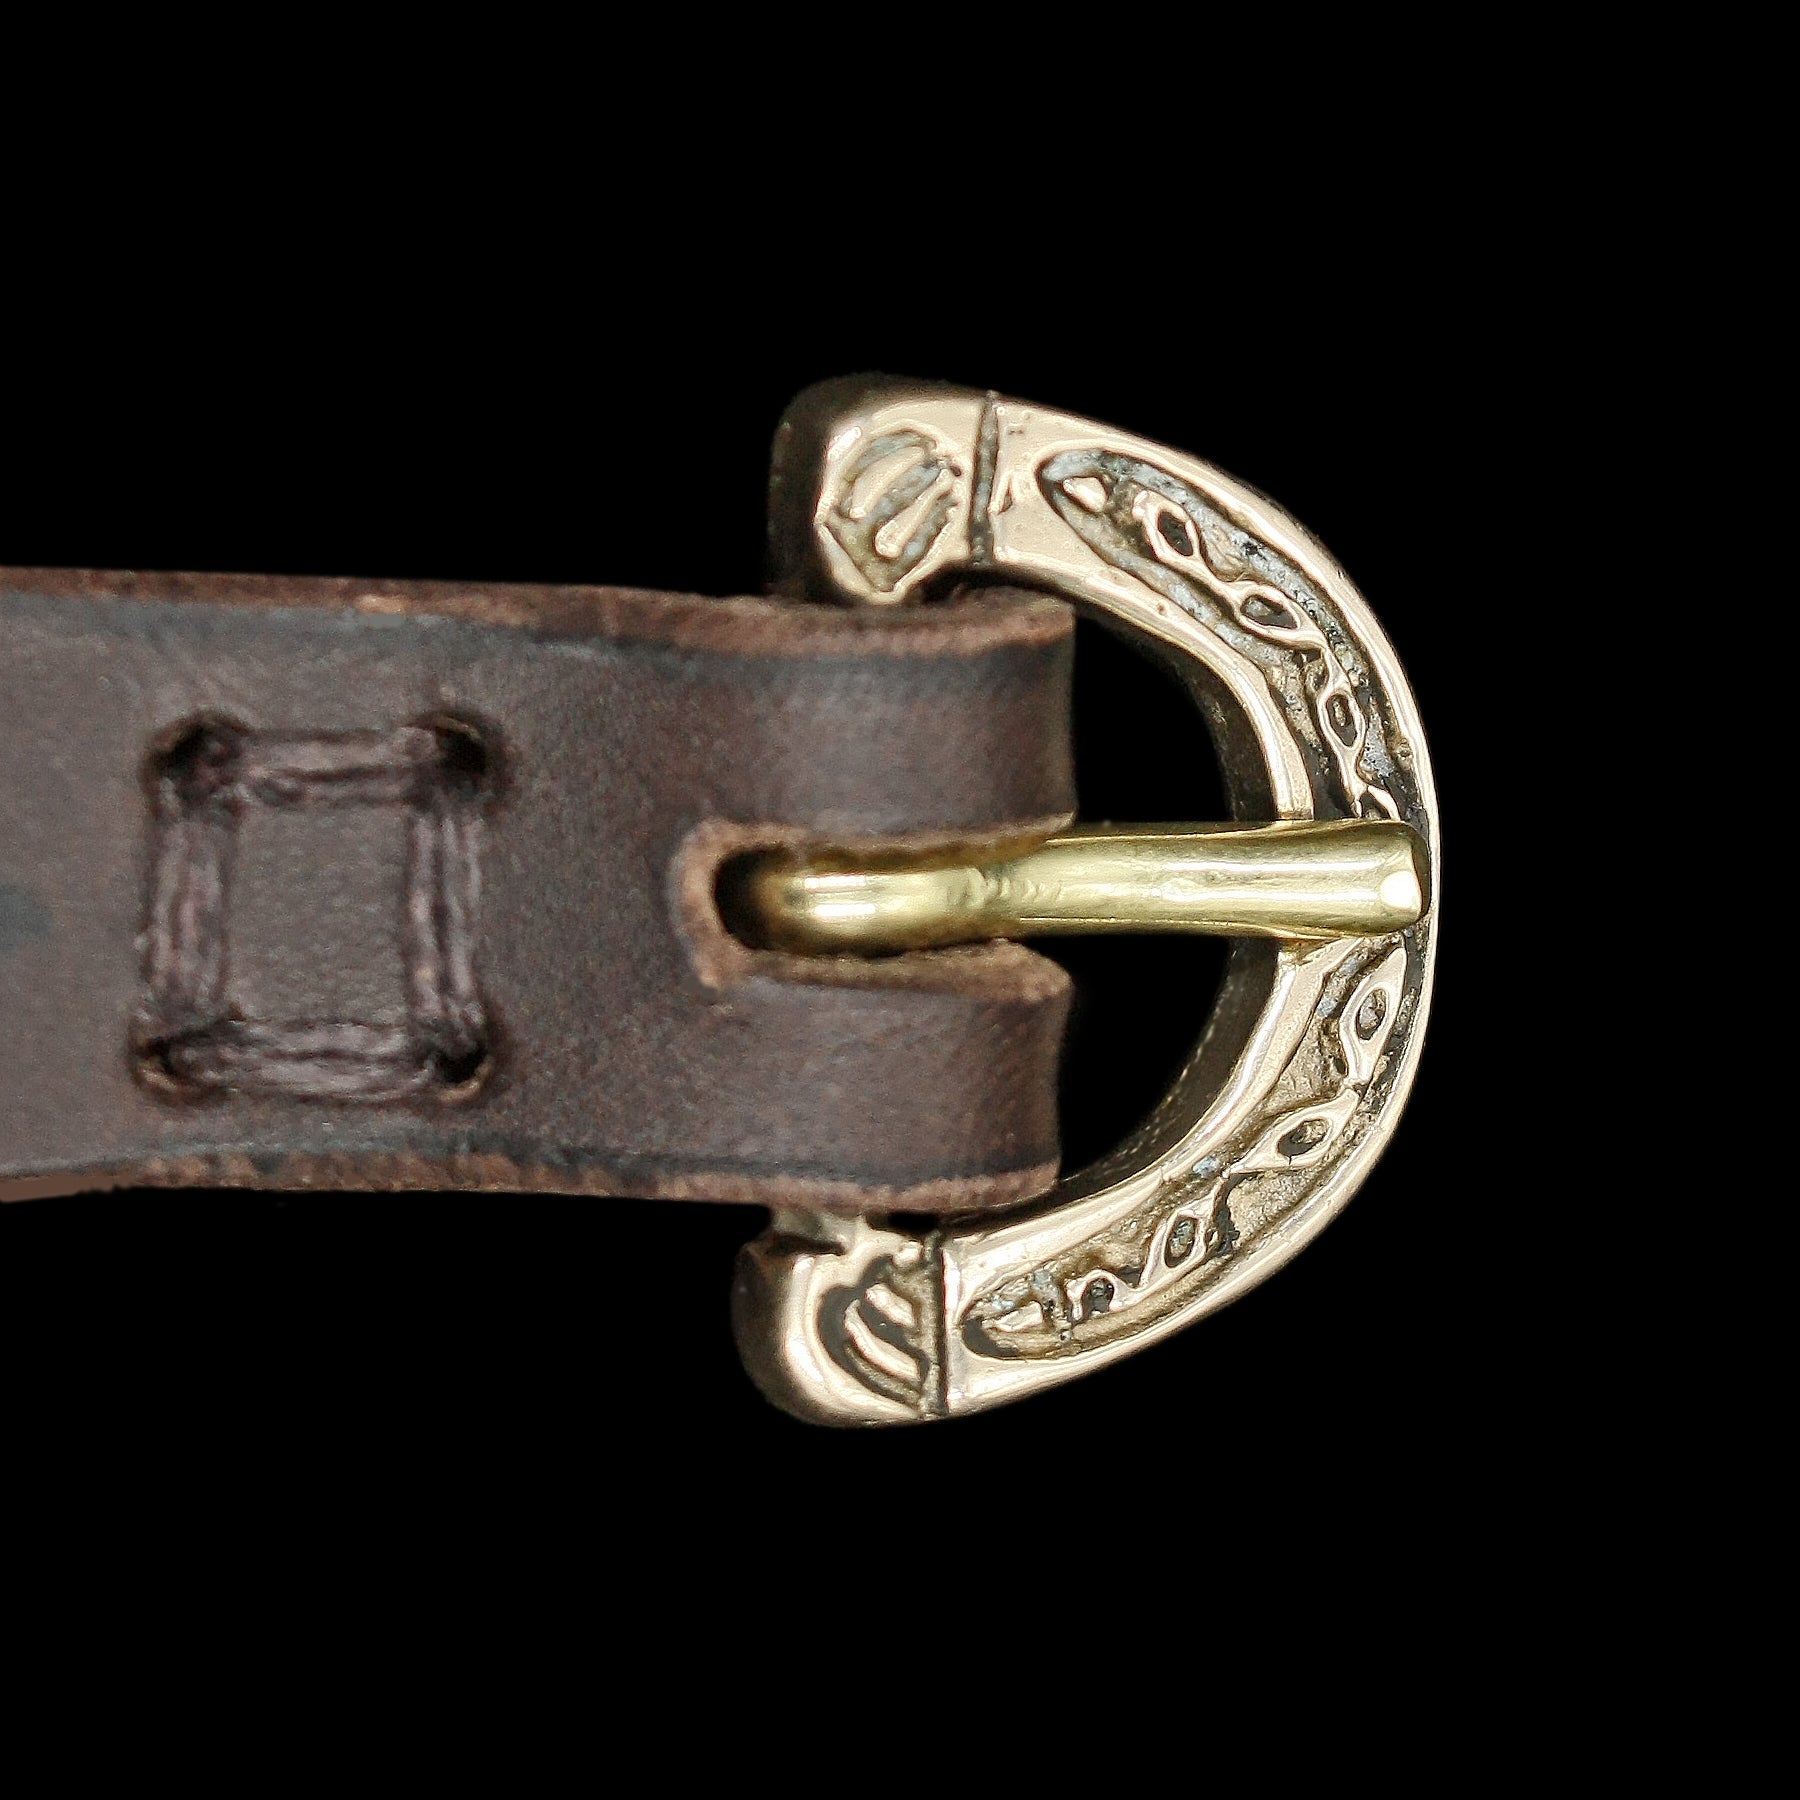 Replica Hiberno-Norse Vking Belt Buckle in Solid Bronze on Leather Strap